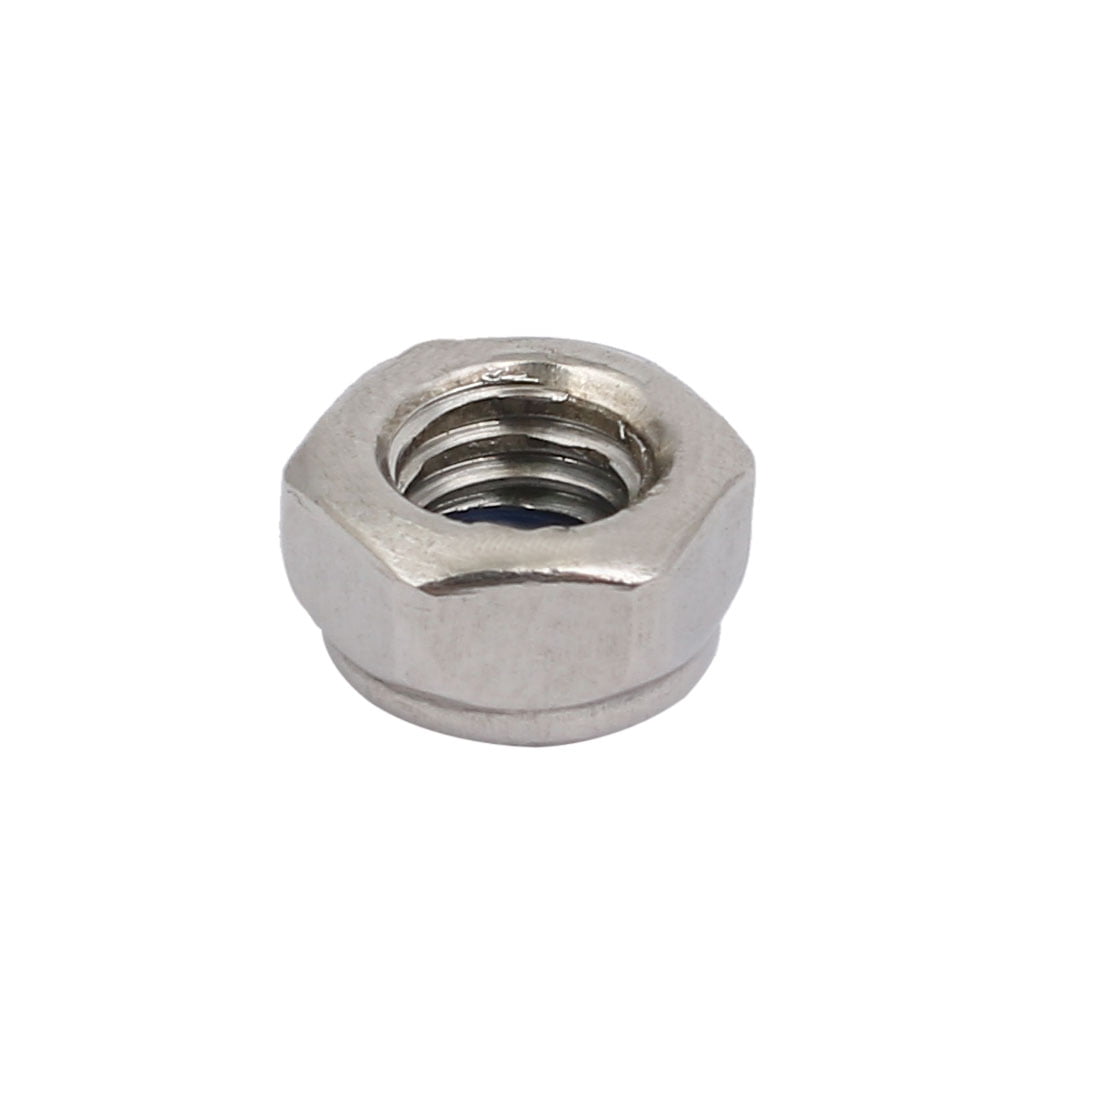 M4/5/6/8/10/12/14/16/18/M24 A2 Stainless Steel Nyloc Nylon Insert Locking Nuts 